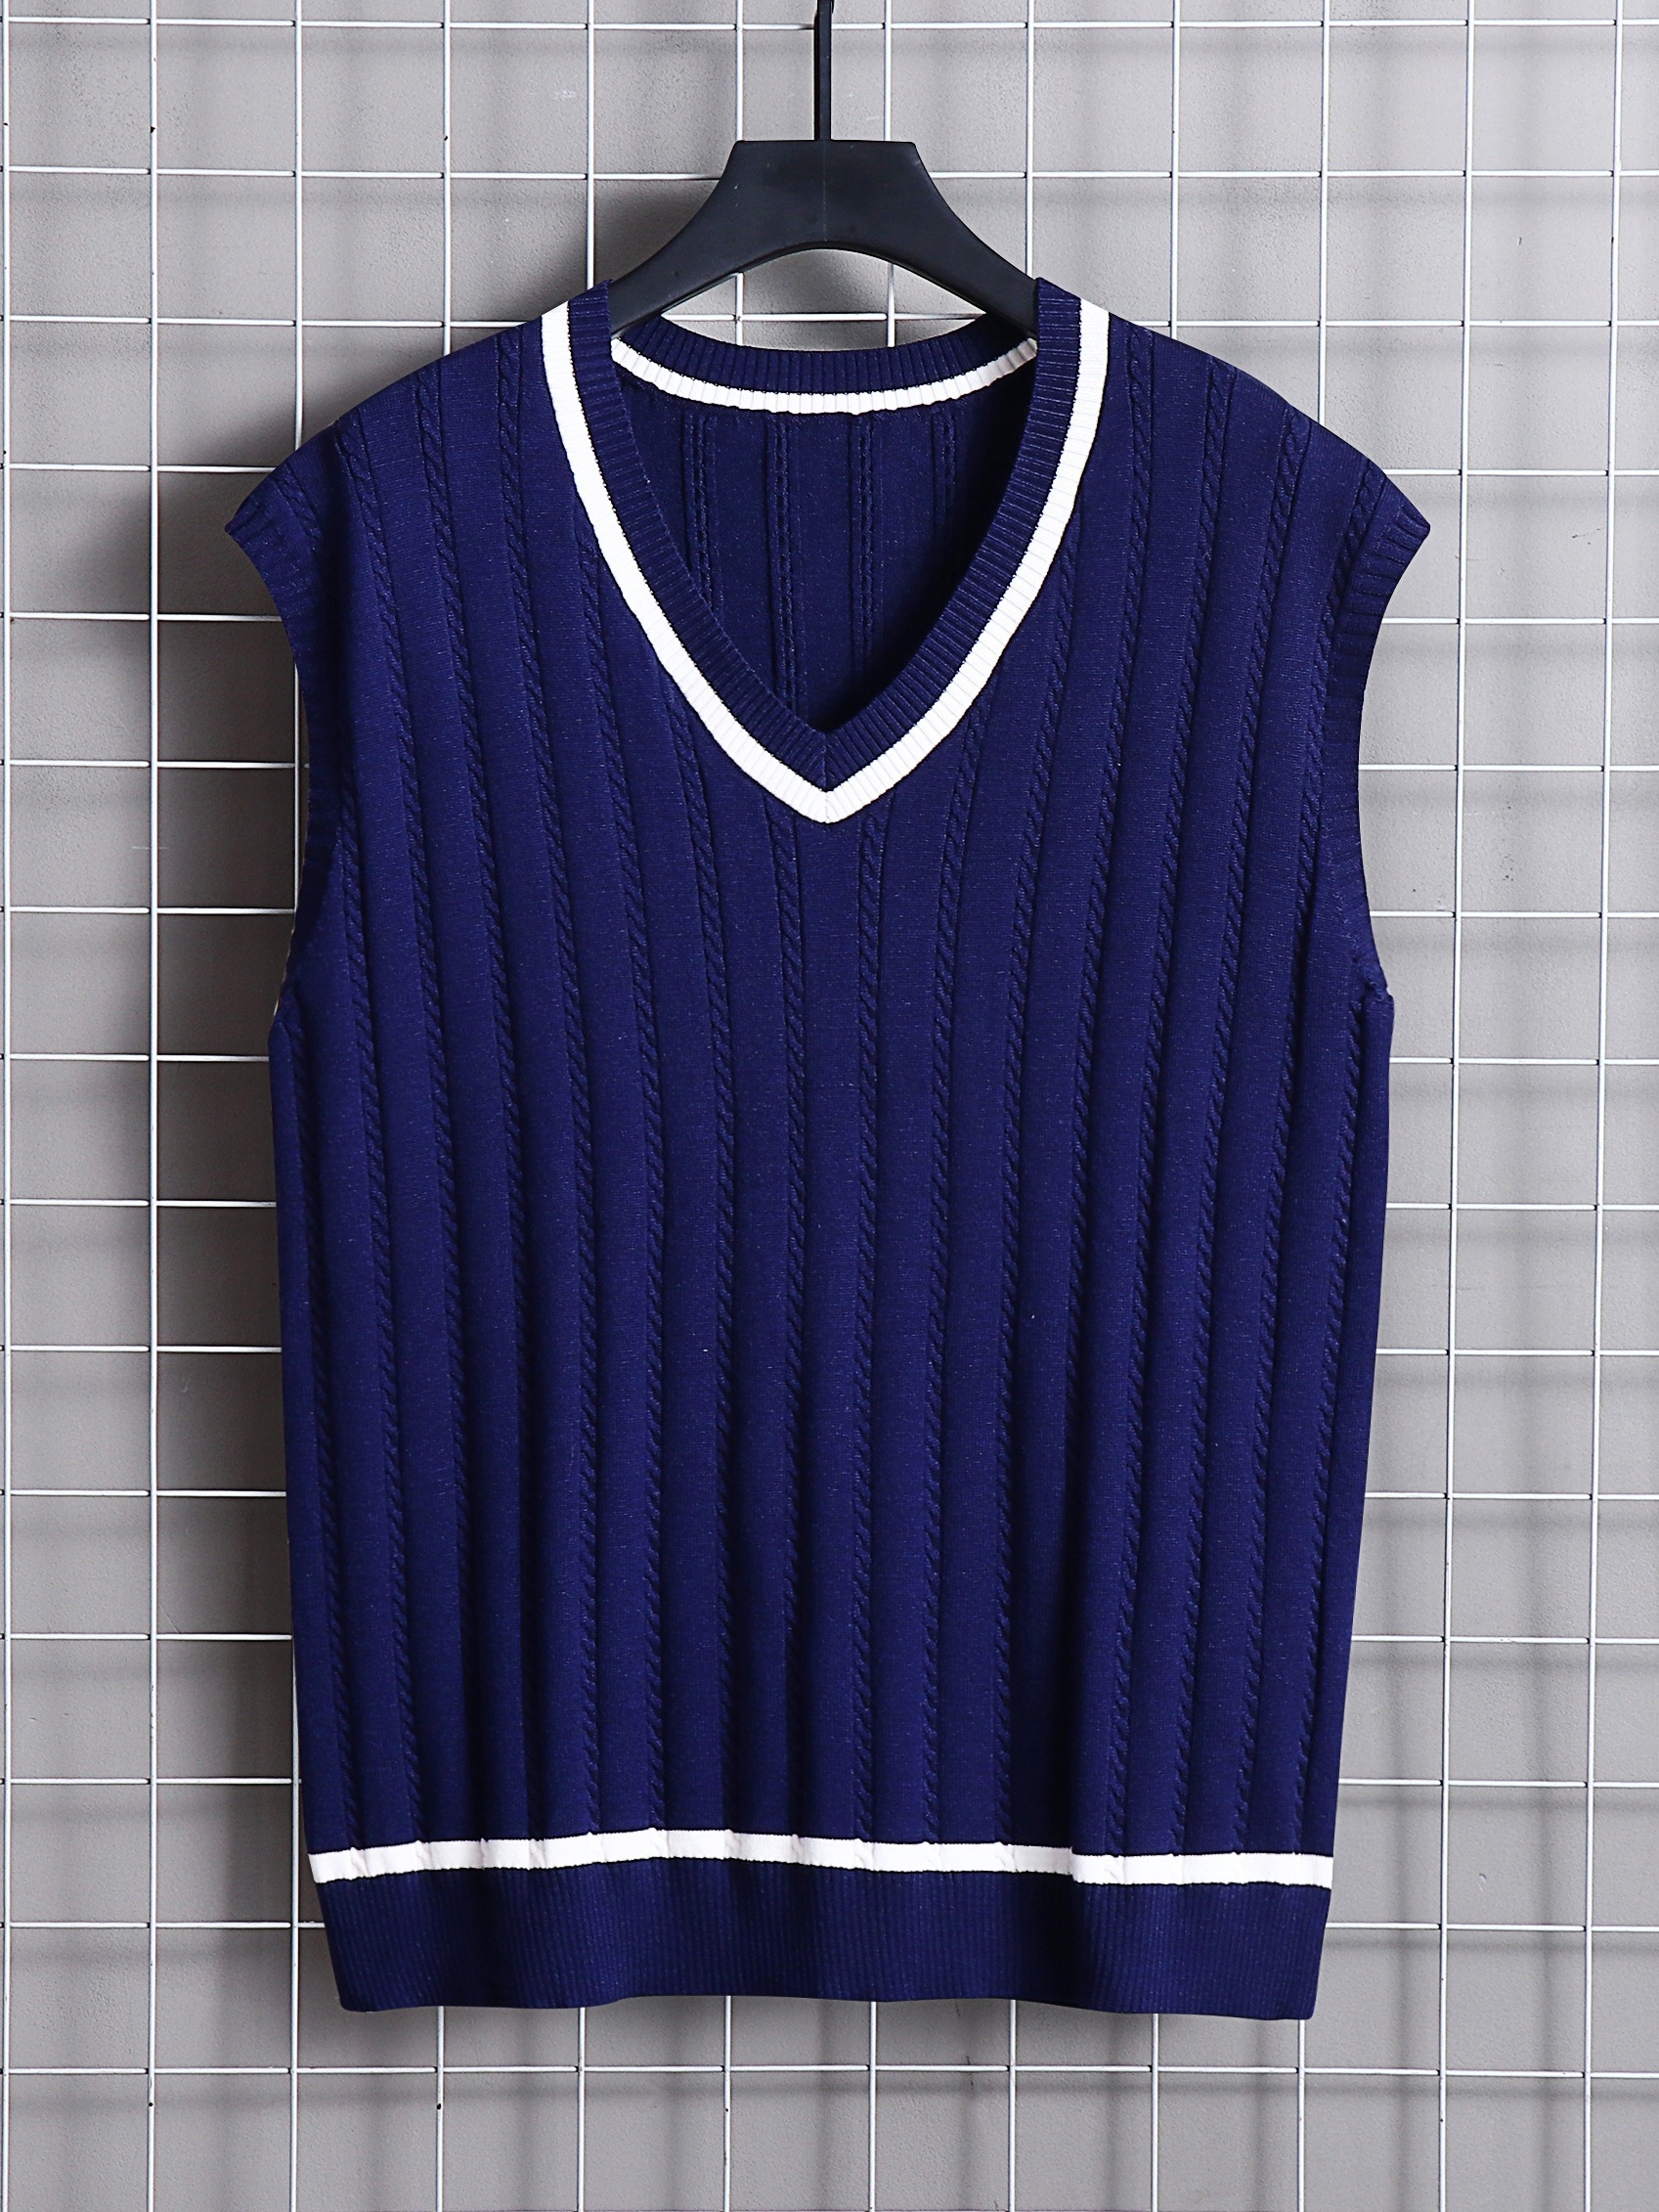 Men's Knitted Vest - Mens Casual Sweater Vest,Blue Sleeveless Men's Knitted  Vest,Loose V Neck Knitted Sweater Tank Top Spring Autumn,Fashion Business  Gentleman Knitwear Vest,Blue,XL : : Clothing, Shoes & Accessories